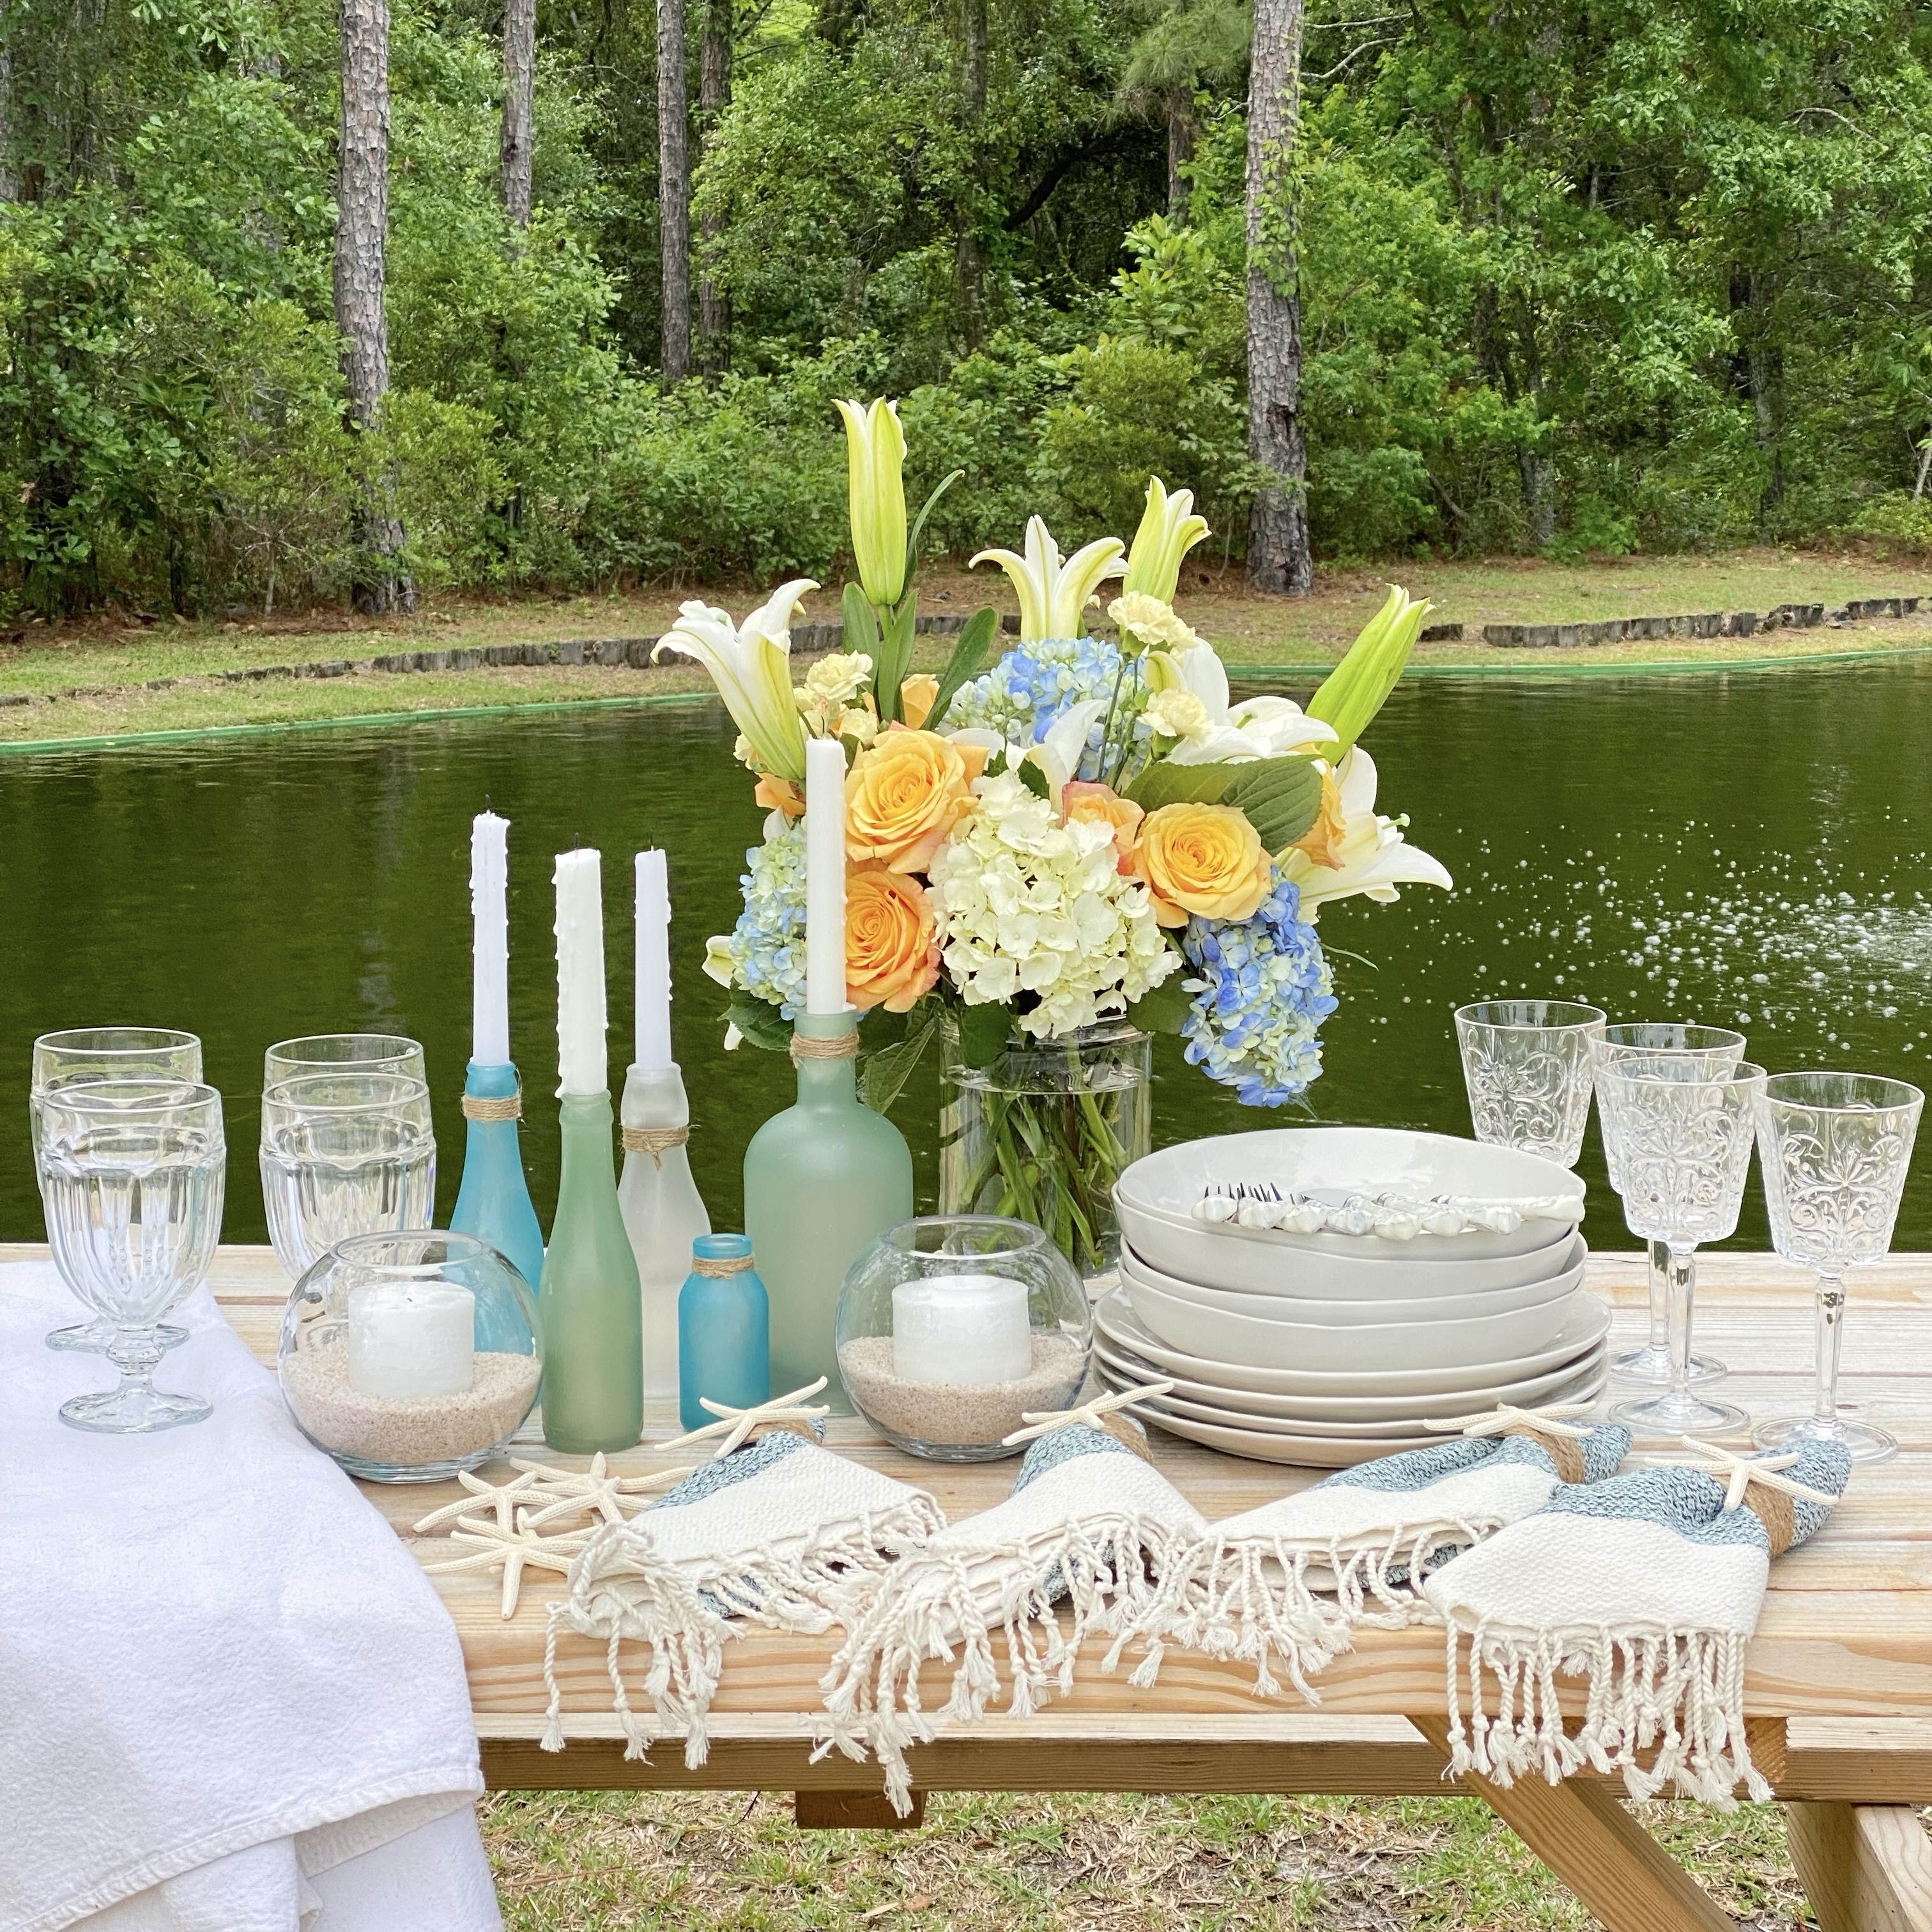 Items to be used in a simple summer tablescape set out on a picnic table by a pond.